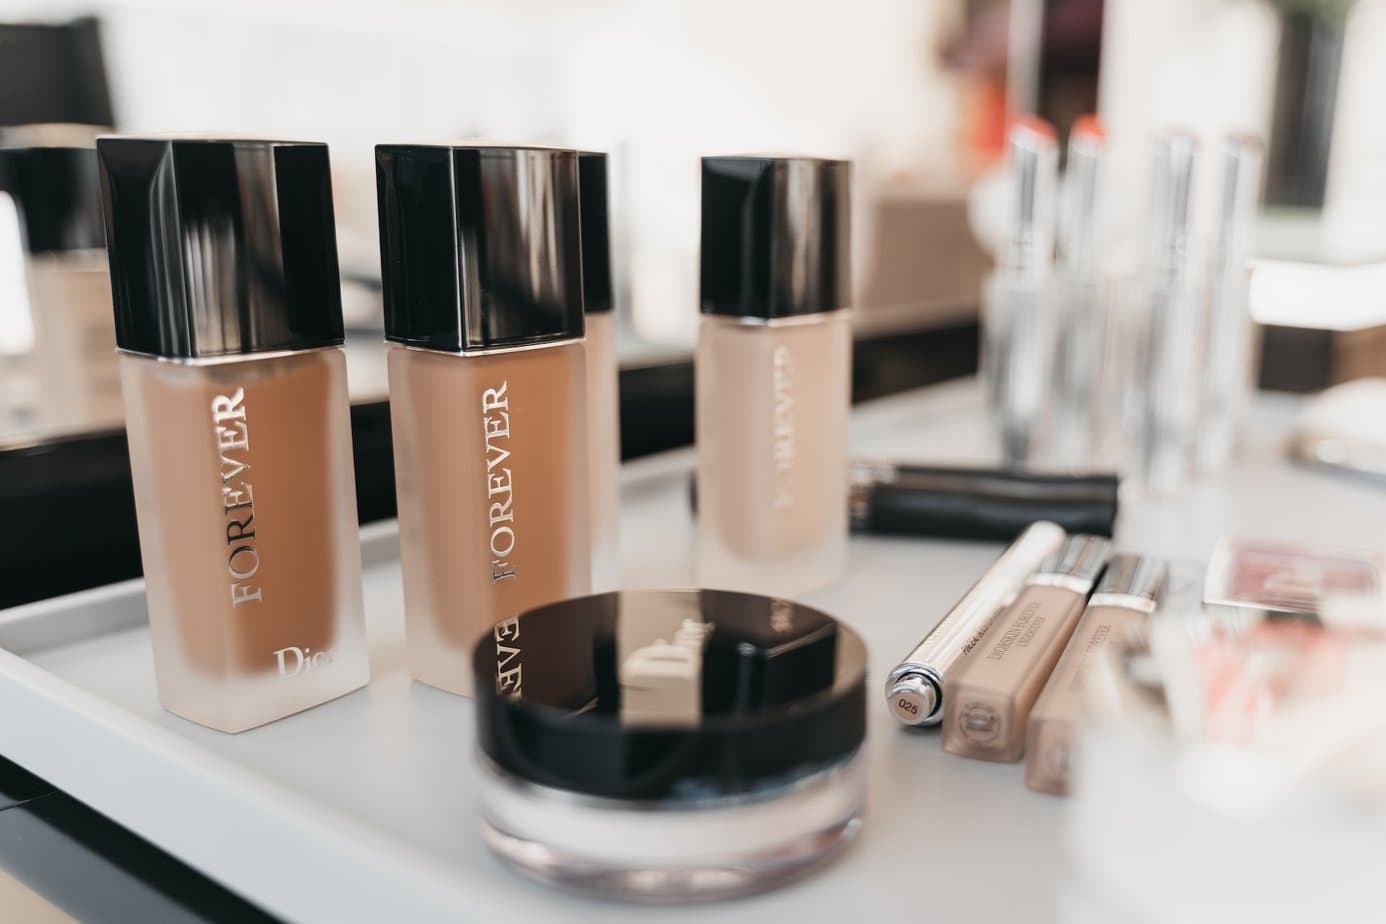 How to choose the perfect shade of foundation?